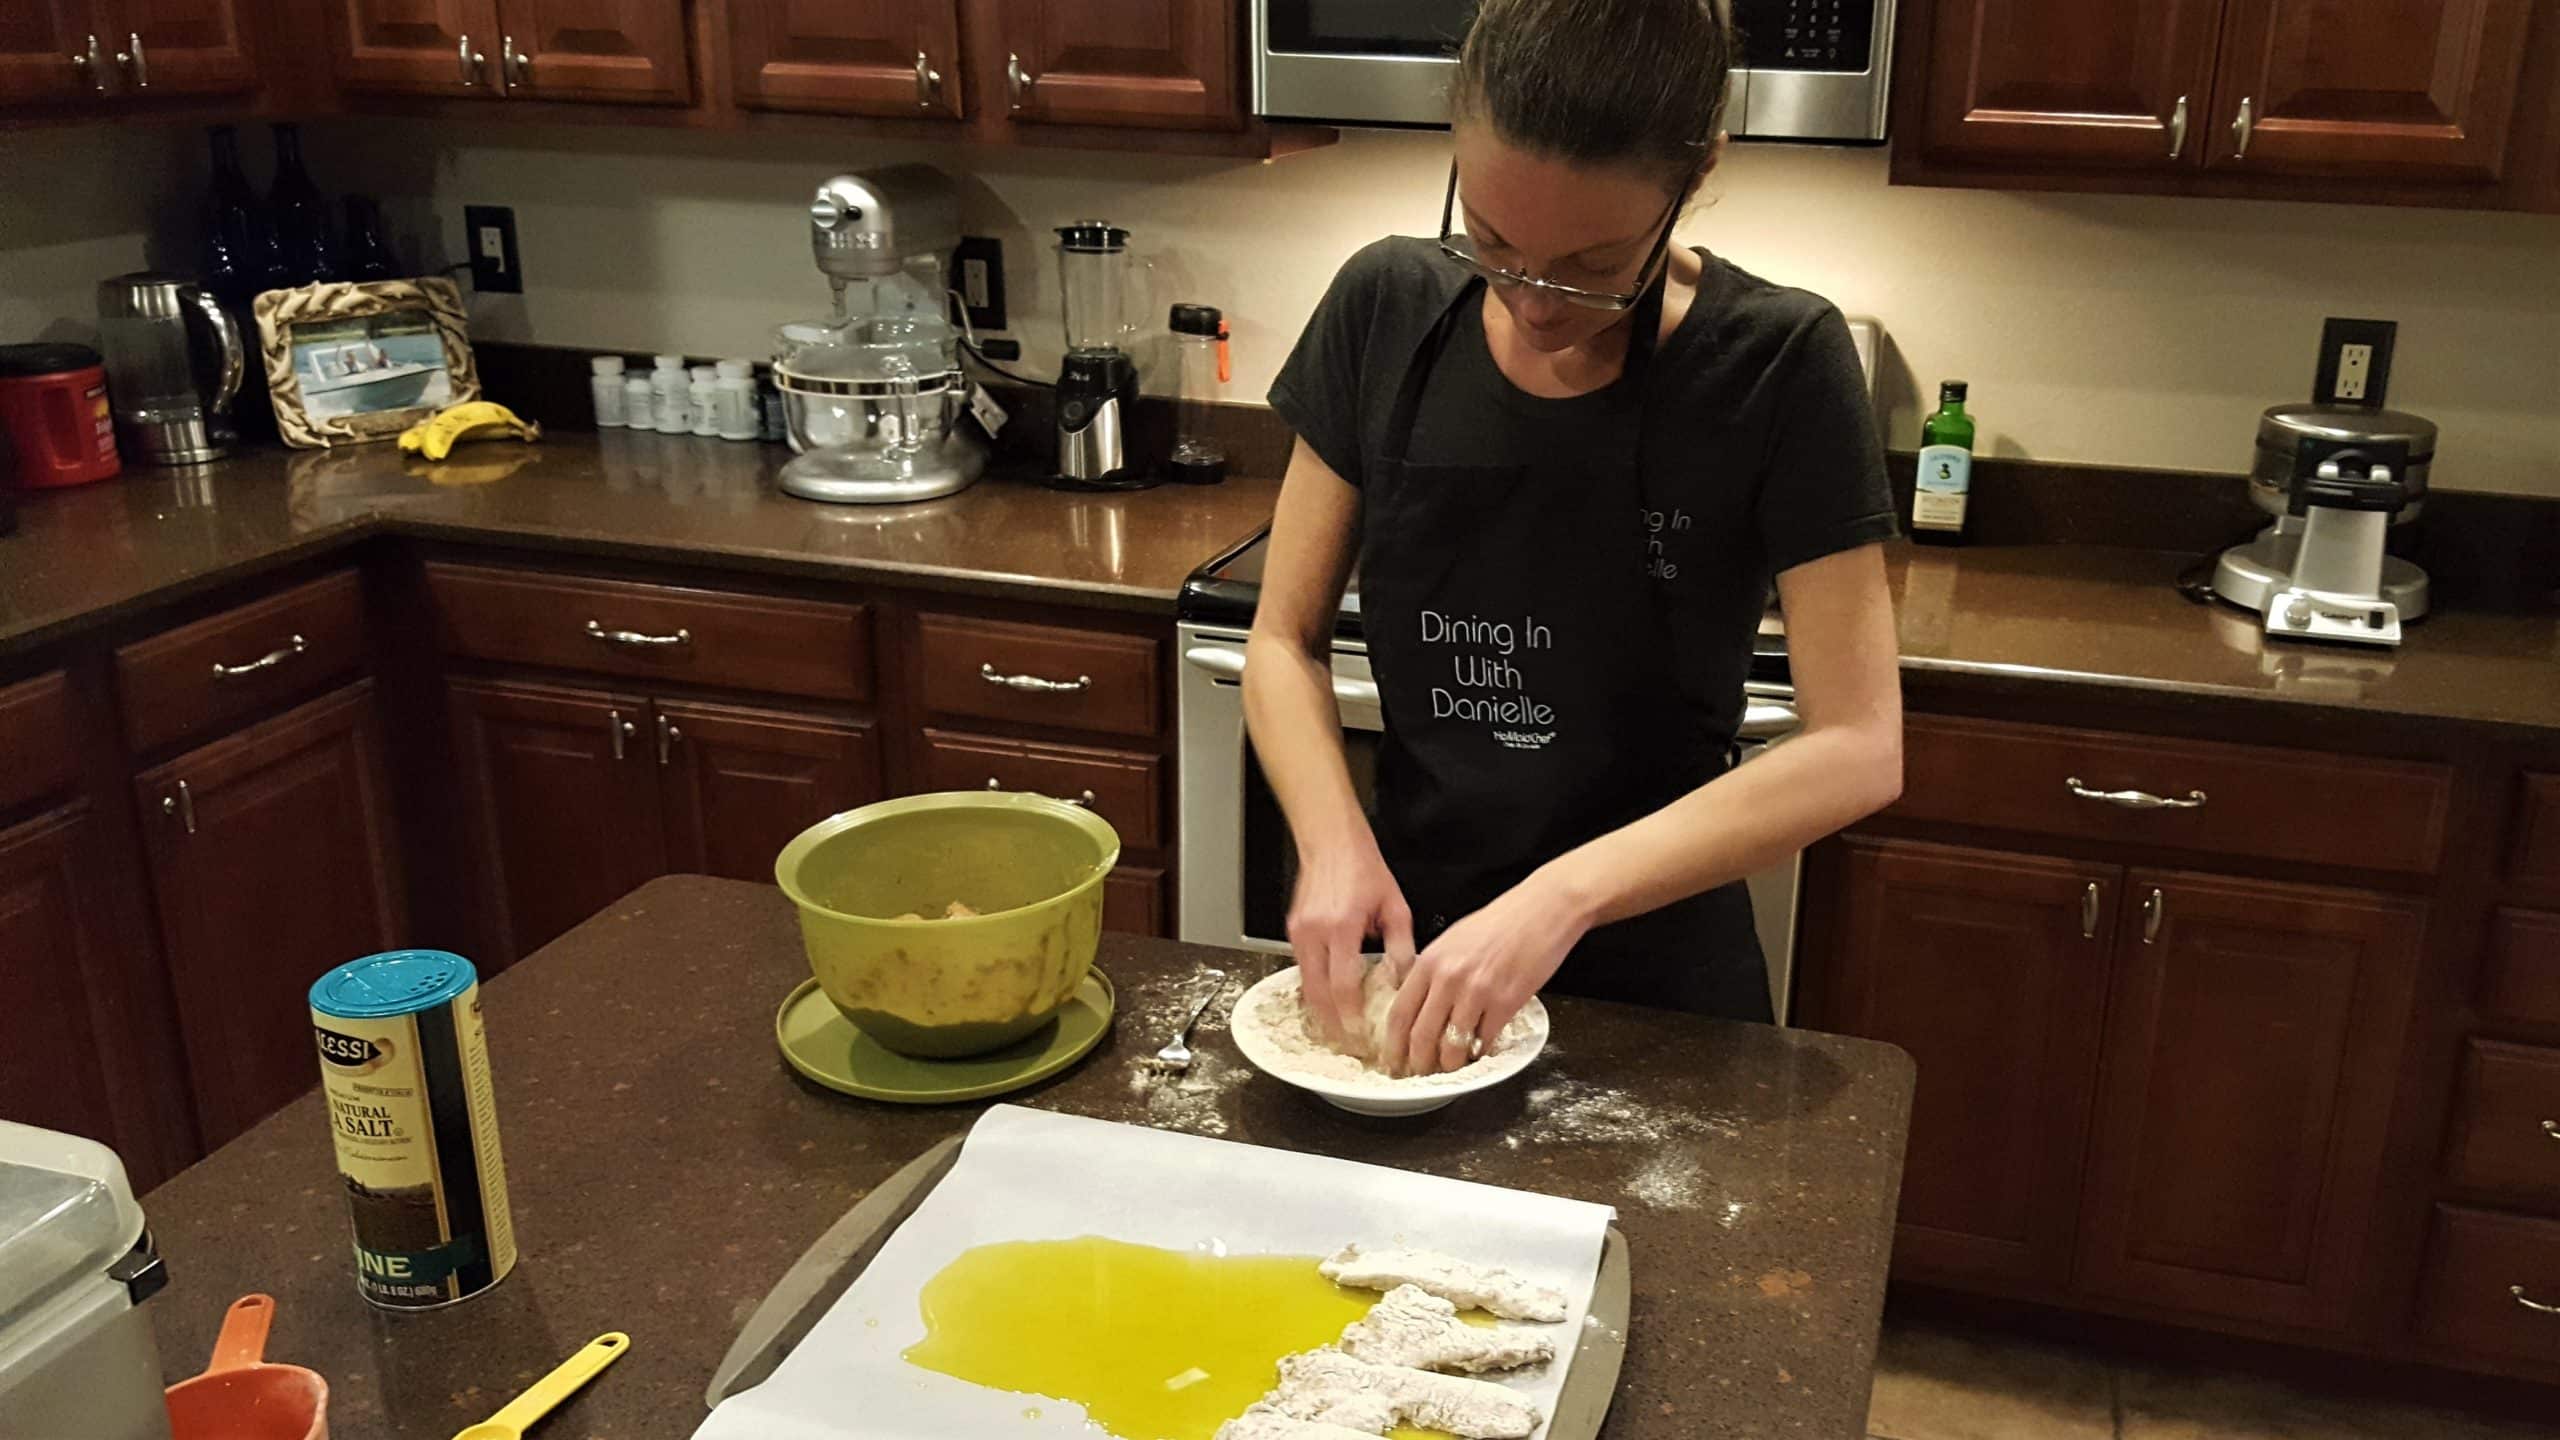 Preparing Chicken Strips for Baking - Dining in with Danielle